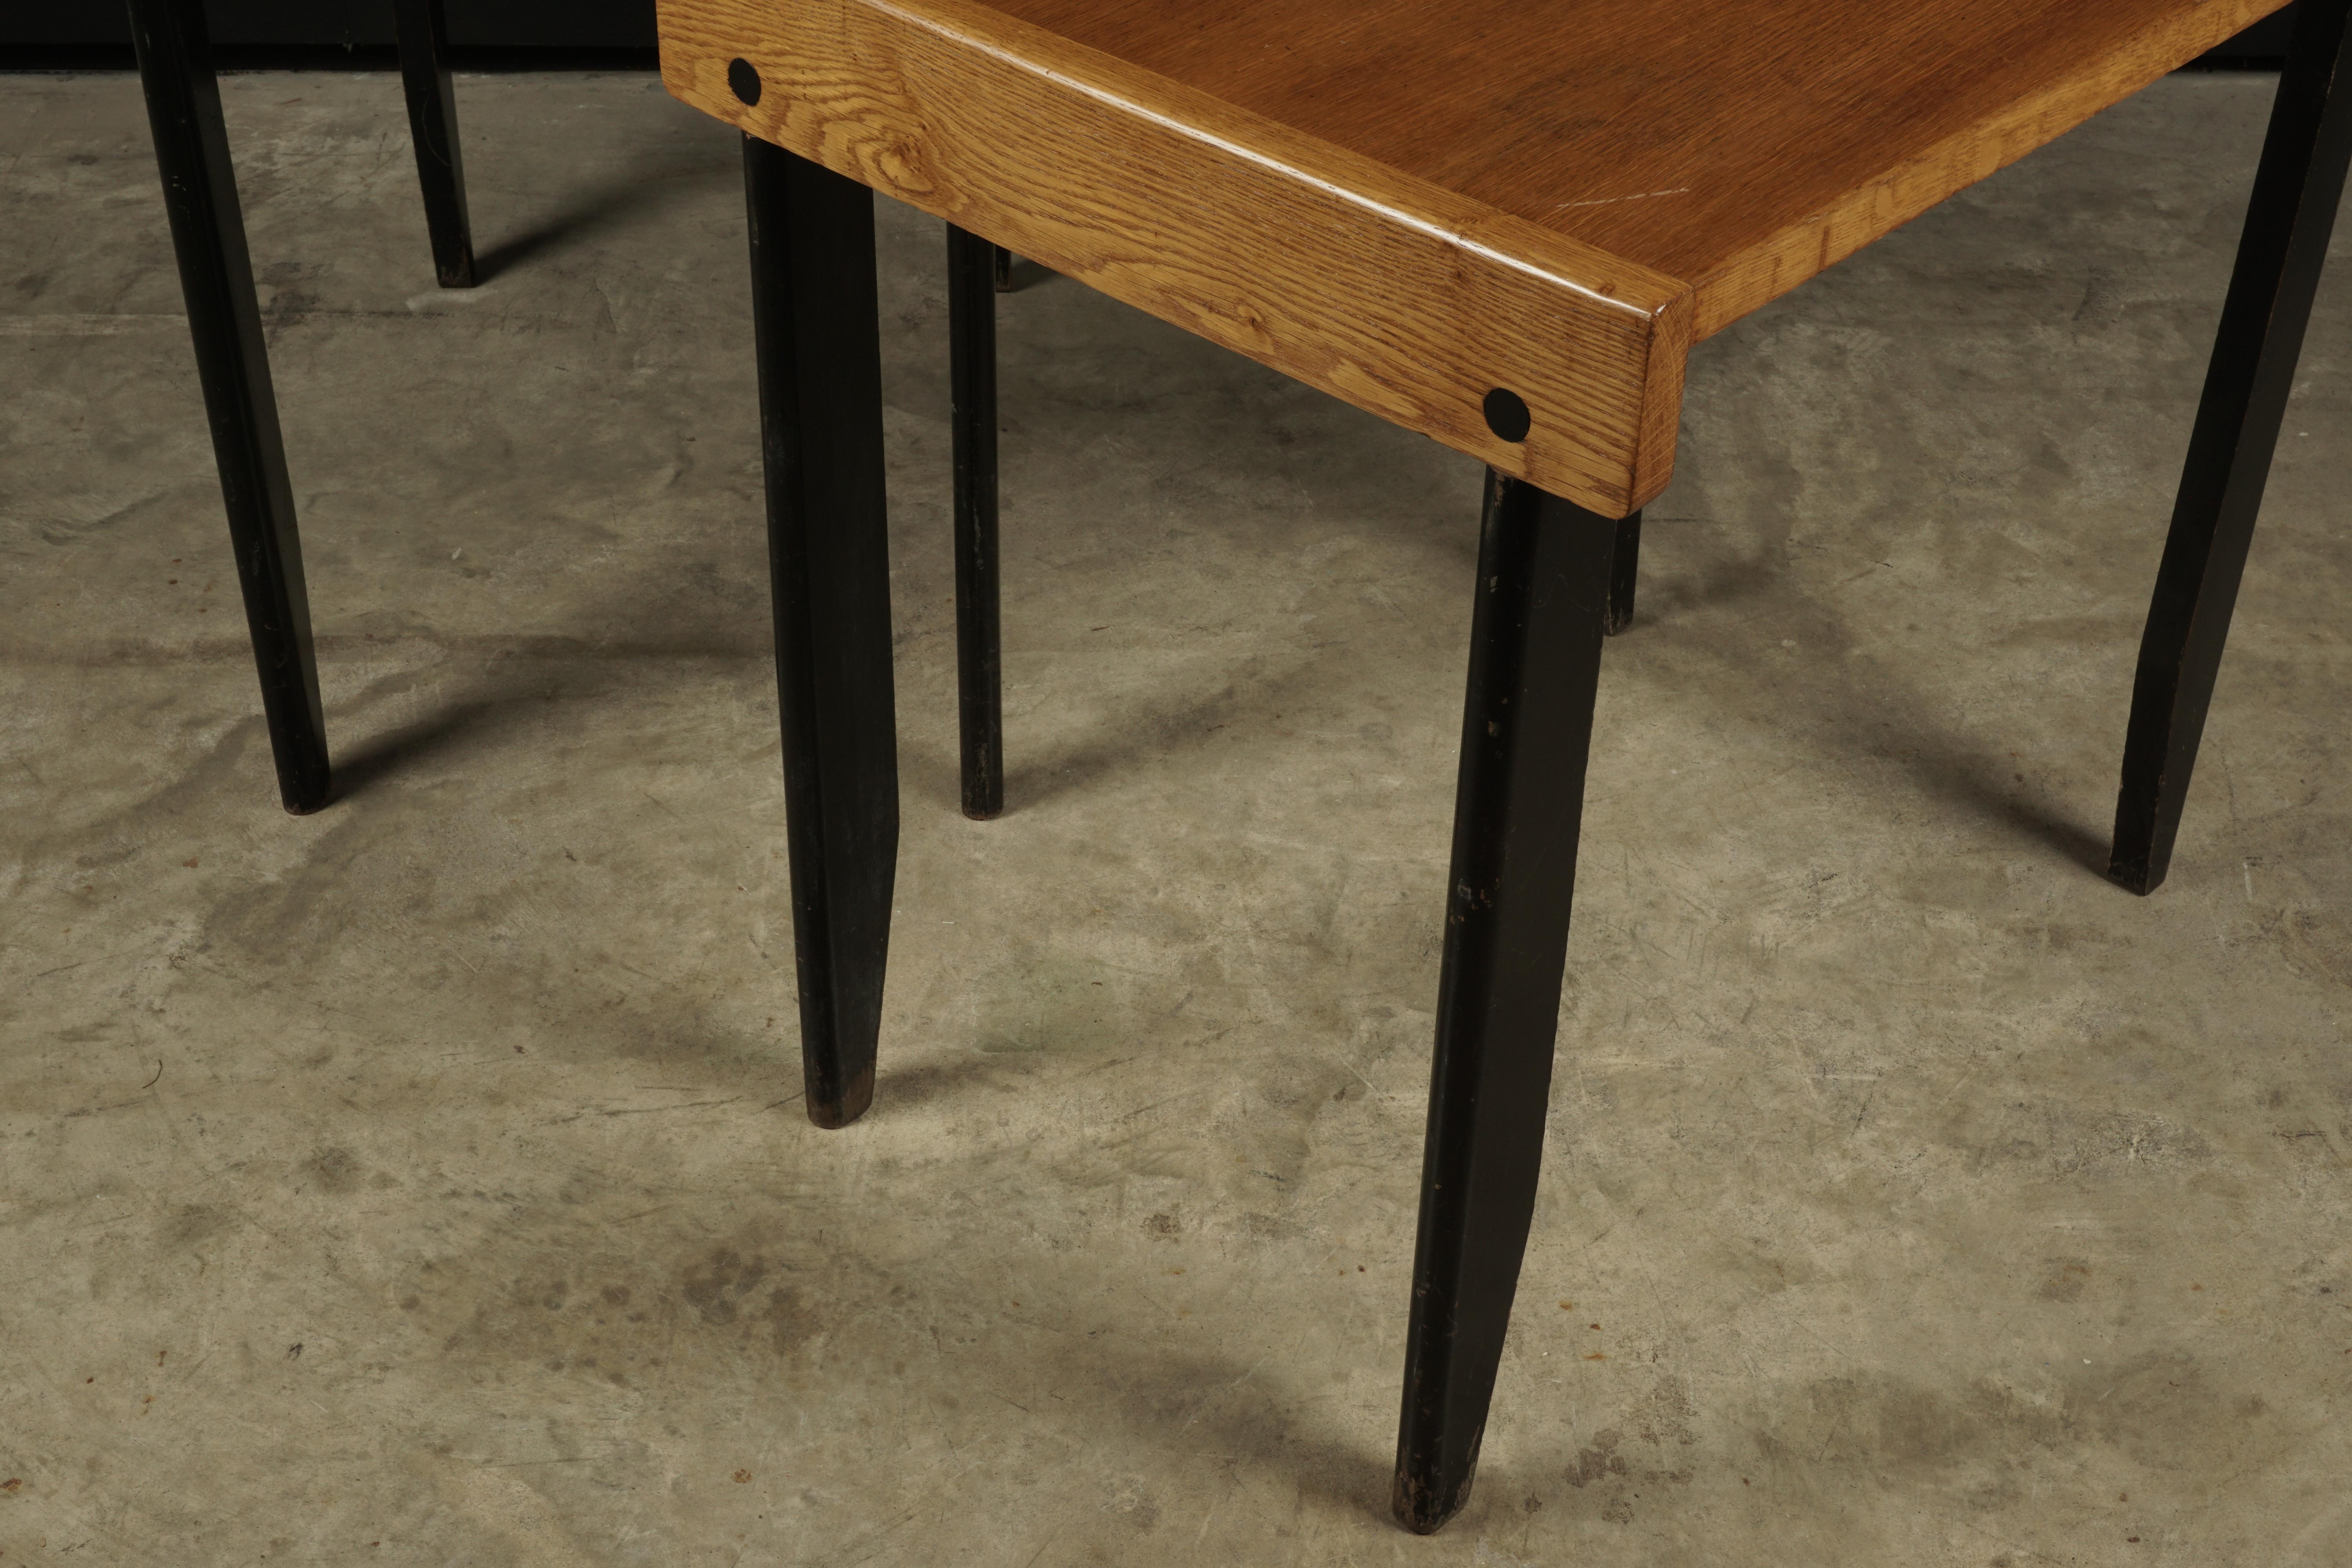 Oak Rare Vintage Pair of Side Tables from France, circa 1960